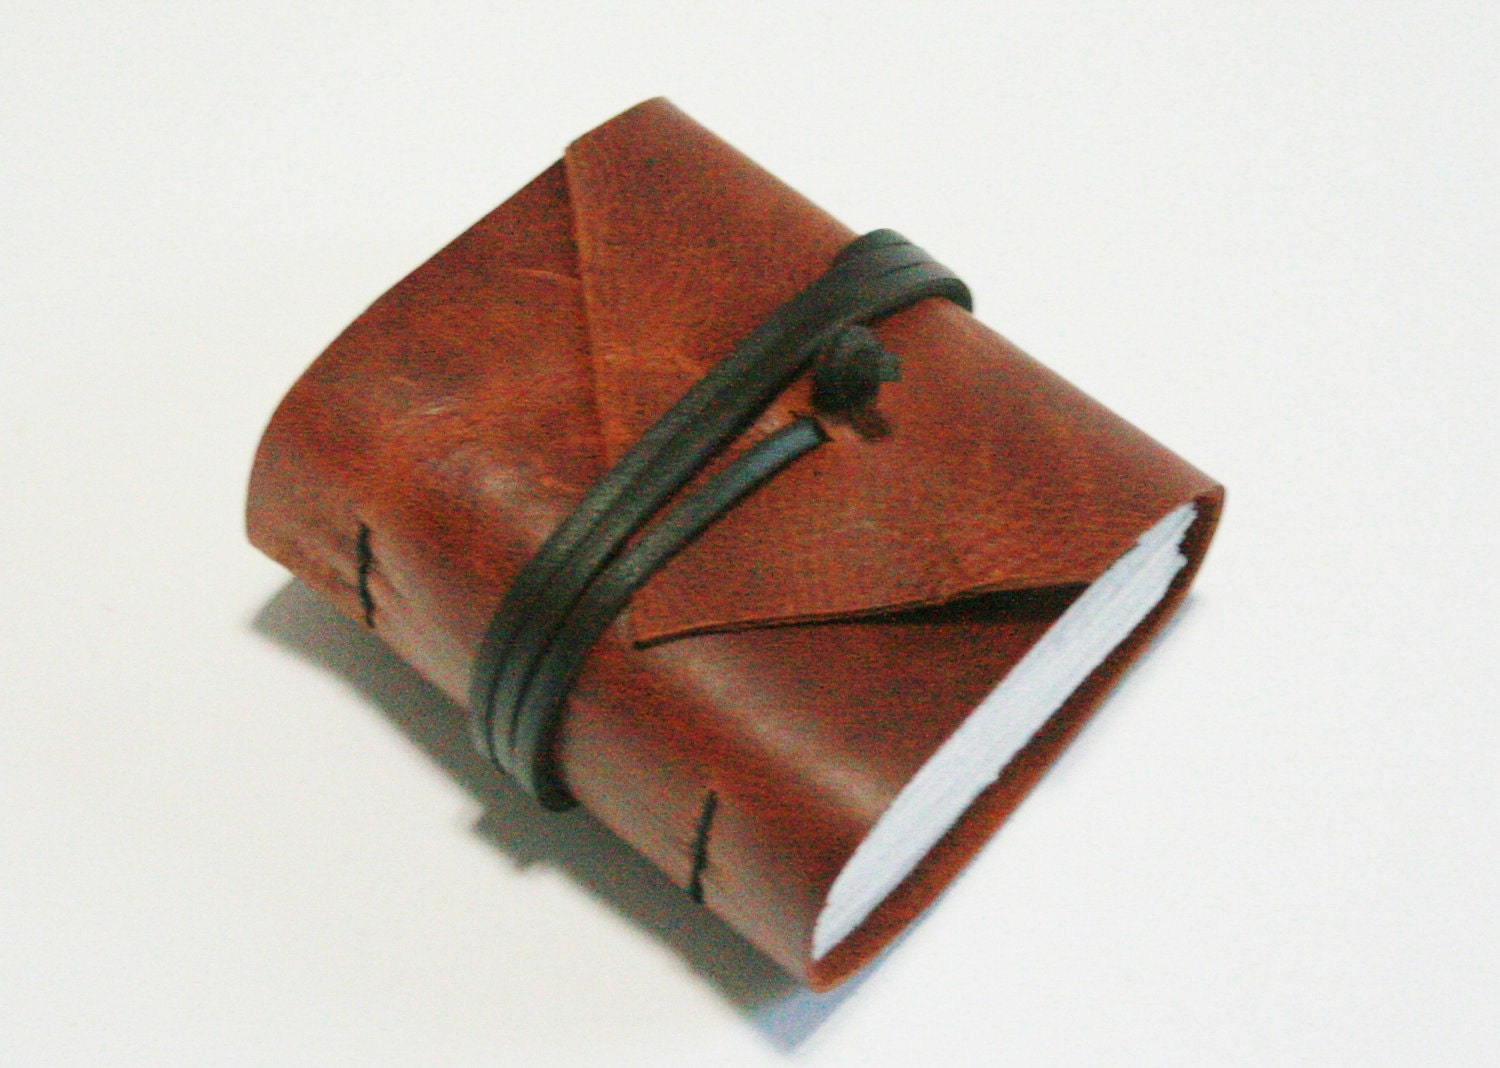 Mini Leather Journal, Chunky Hand-Bound Marbled Red Brown 3 x 3.25 Journal by The Orange Windmill on Etsy